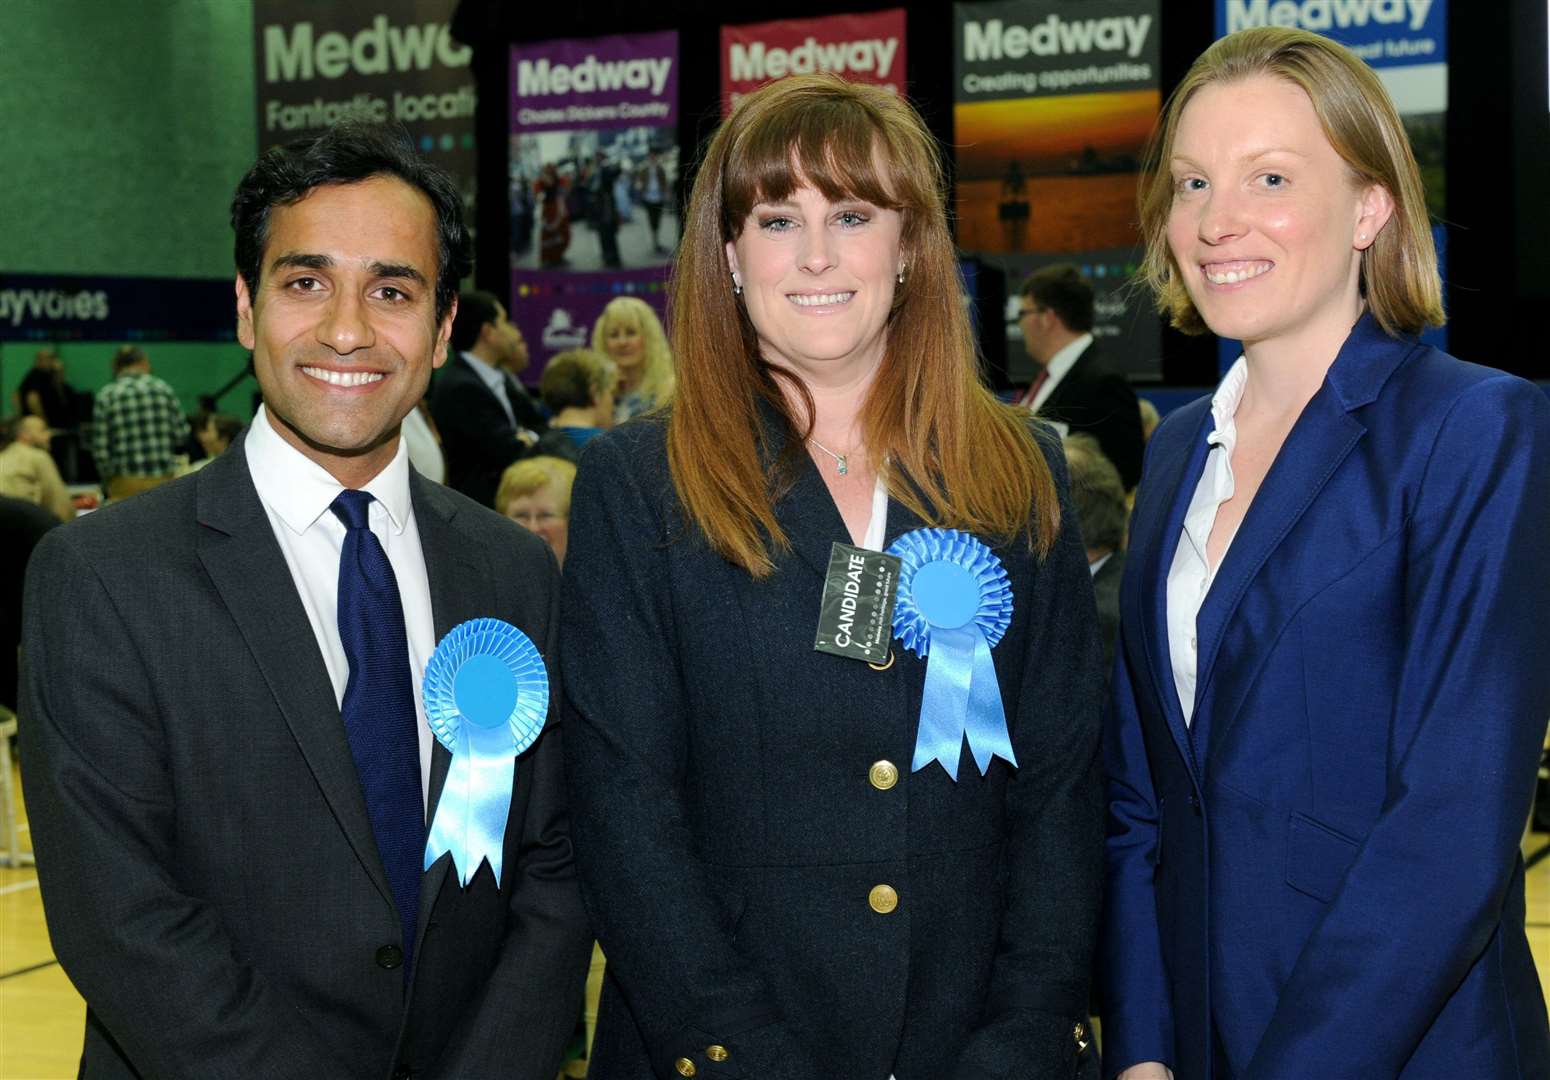 Medway MPs Rehman Chishti, Kelly Tolhurst and Tracey Crouch have paid tribute